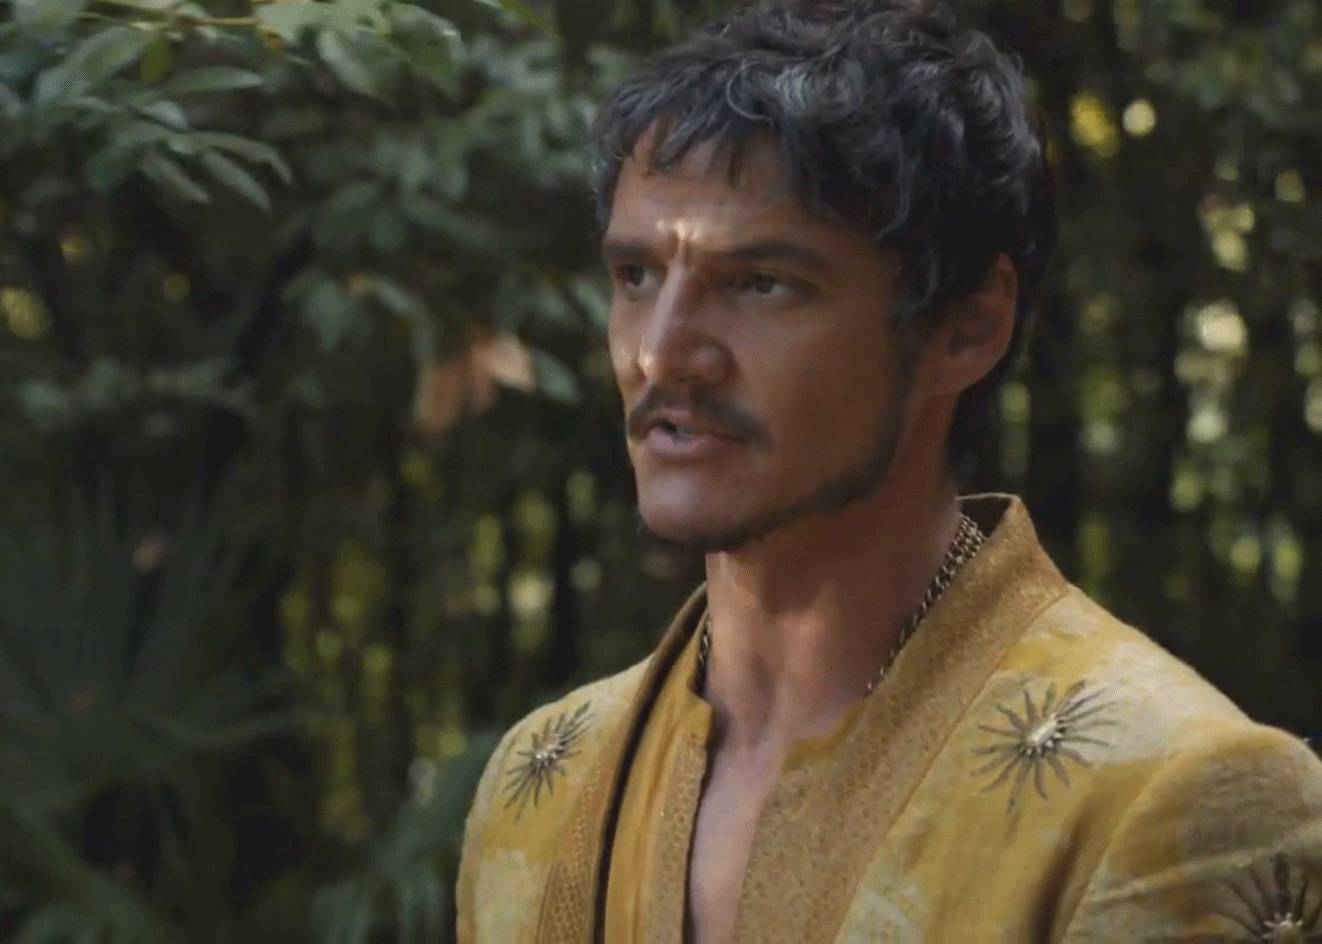 Game of Thrones trailer teases new character Oberyn Martell